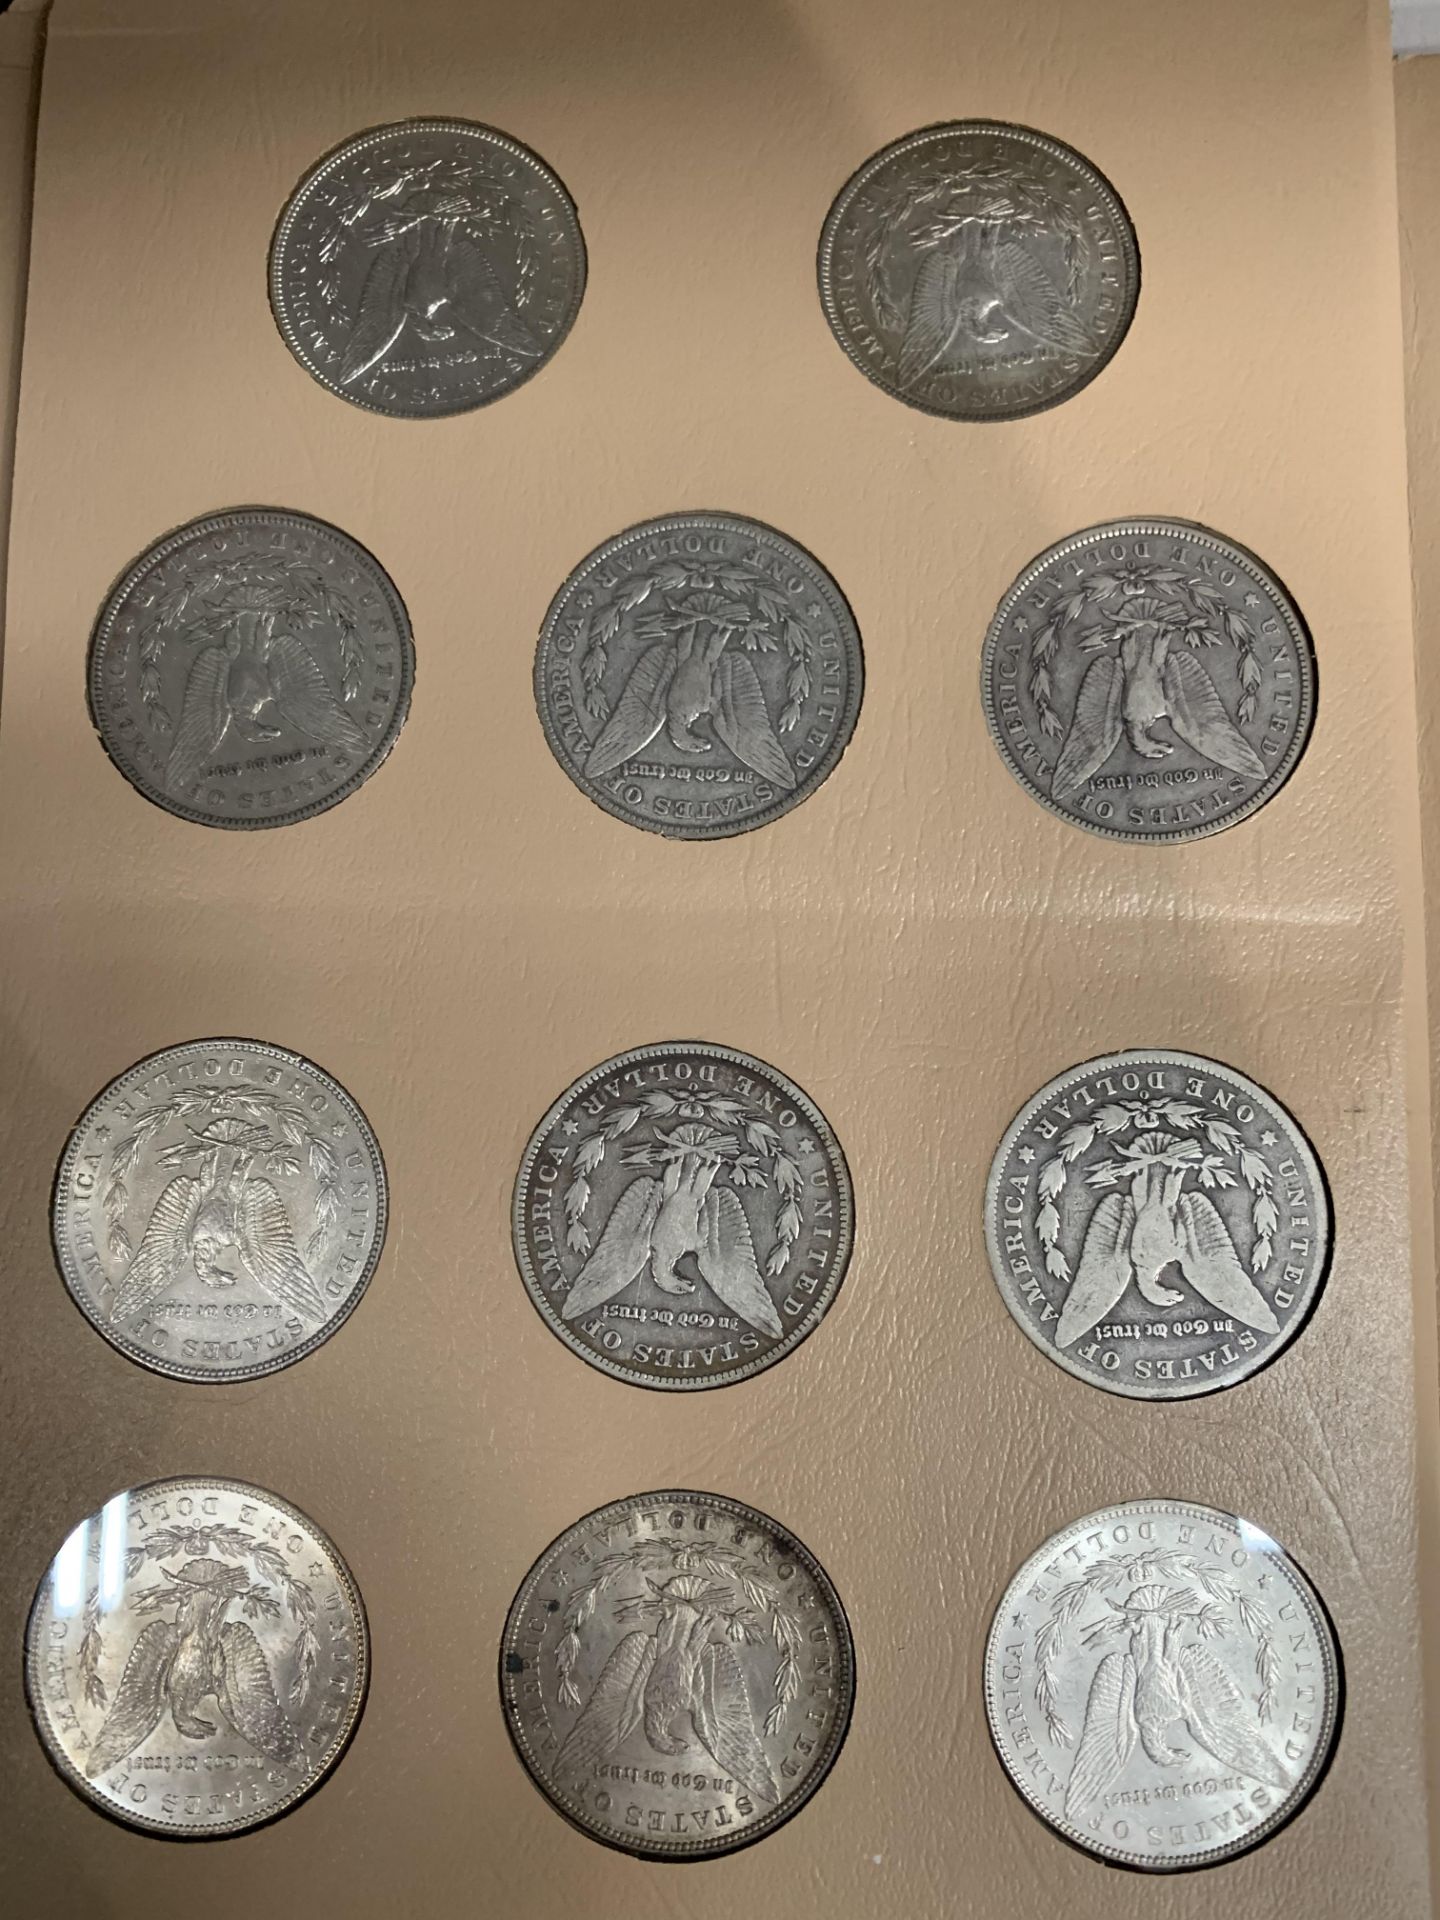 Morgan silver dollar complete date set 1878-1904 - 28 coins including rare dates 1893 and 1895 - Image 7 of 10